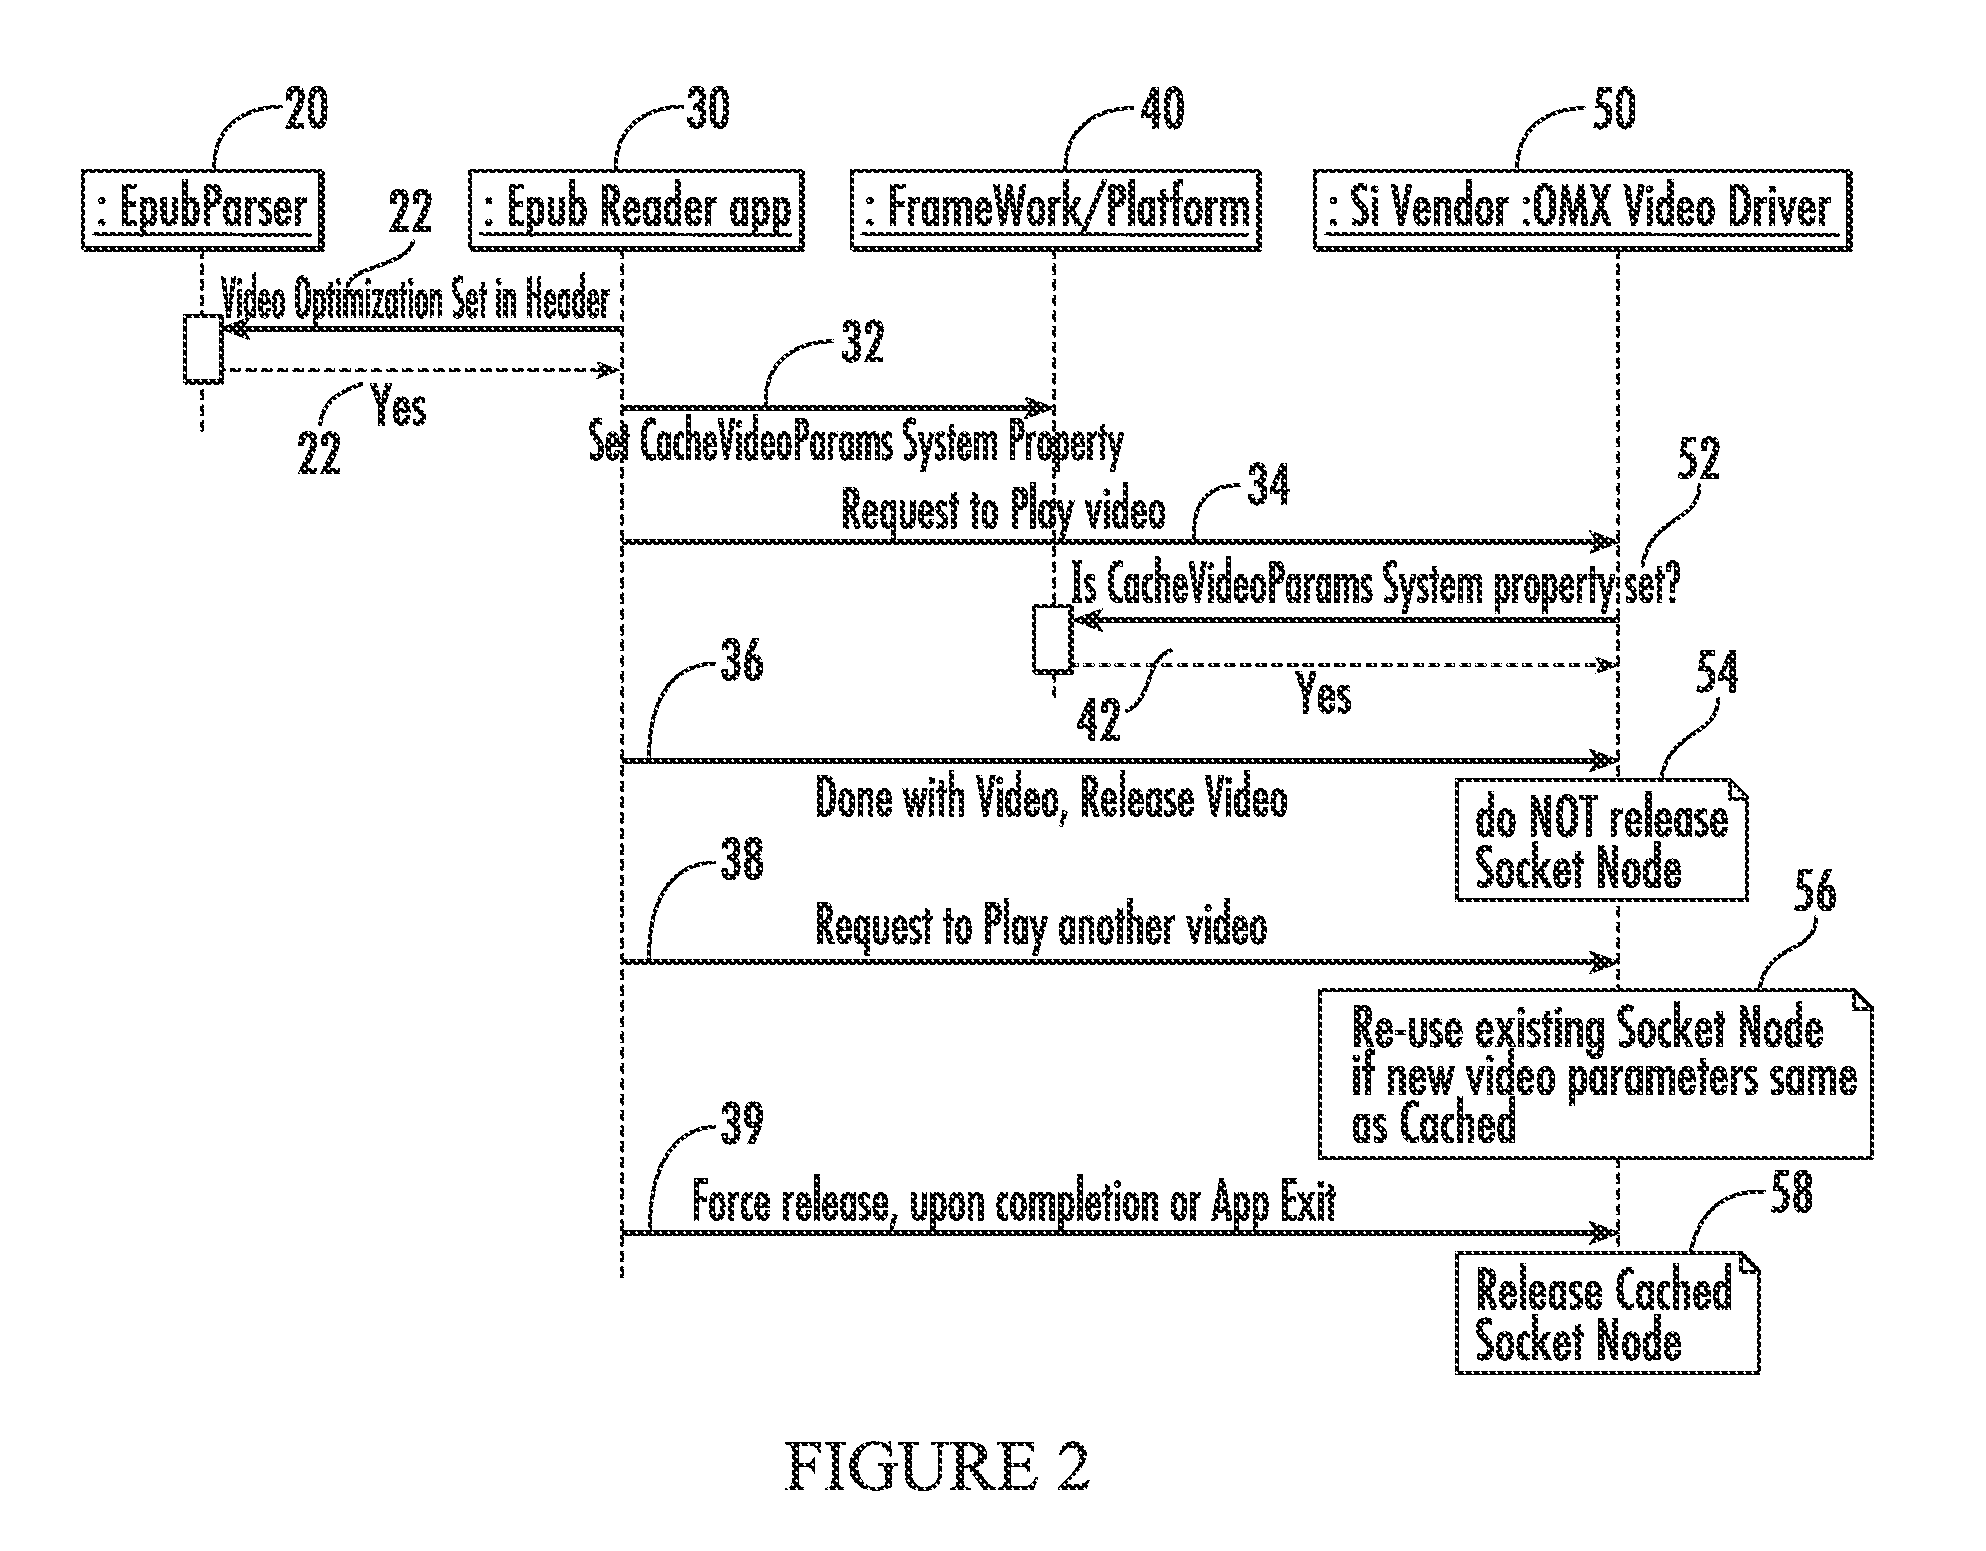 System and method for enabling execution of video files by readers of electronic publications